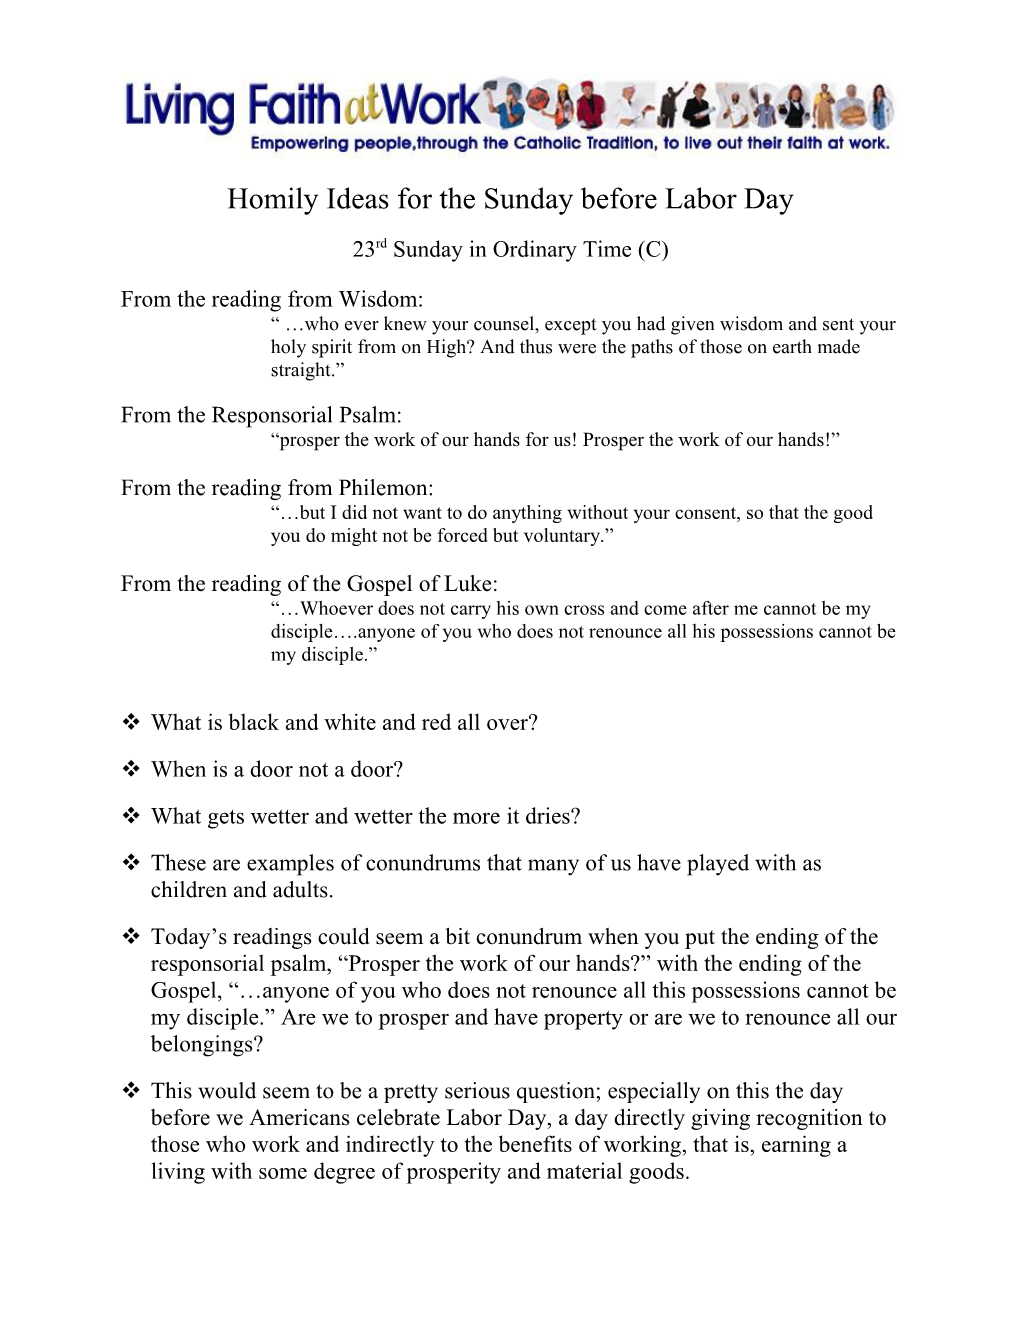 Homily 23Rd Sunday in Ordinary Time (C)